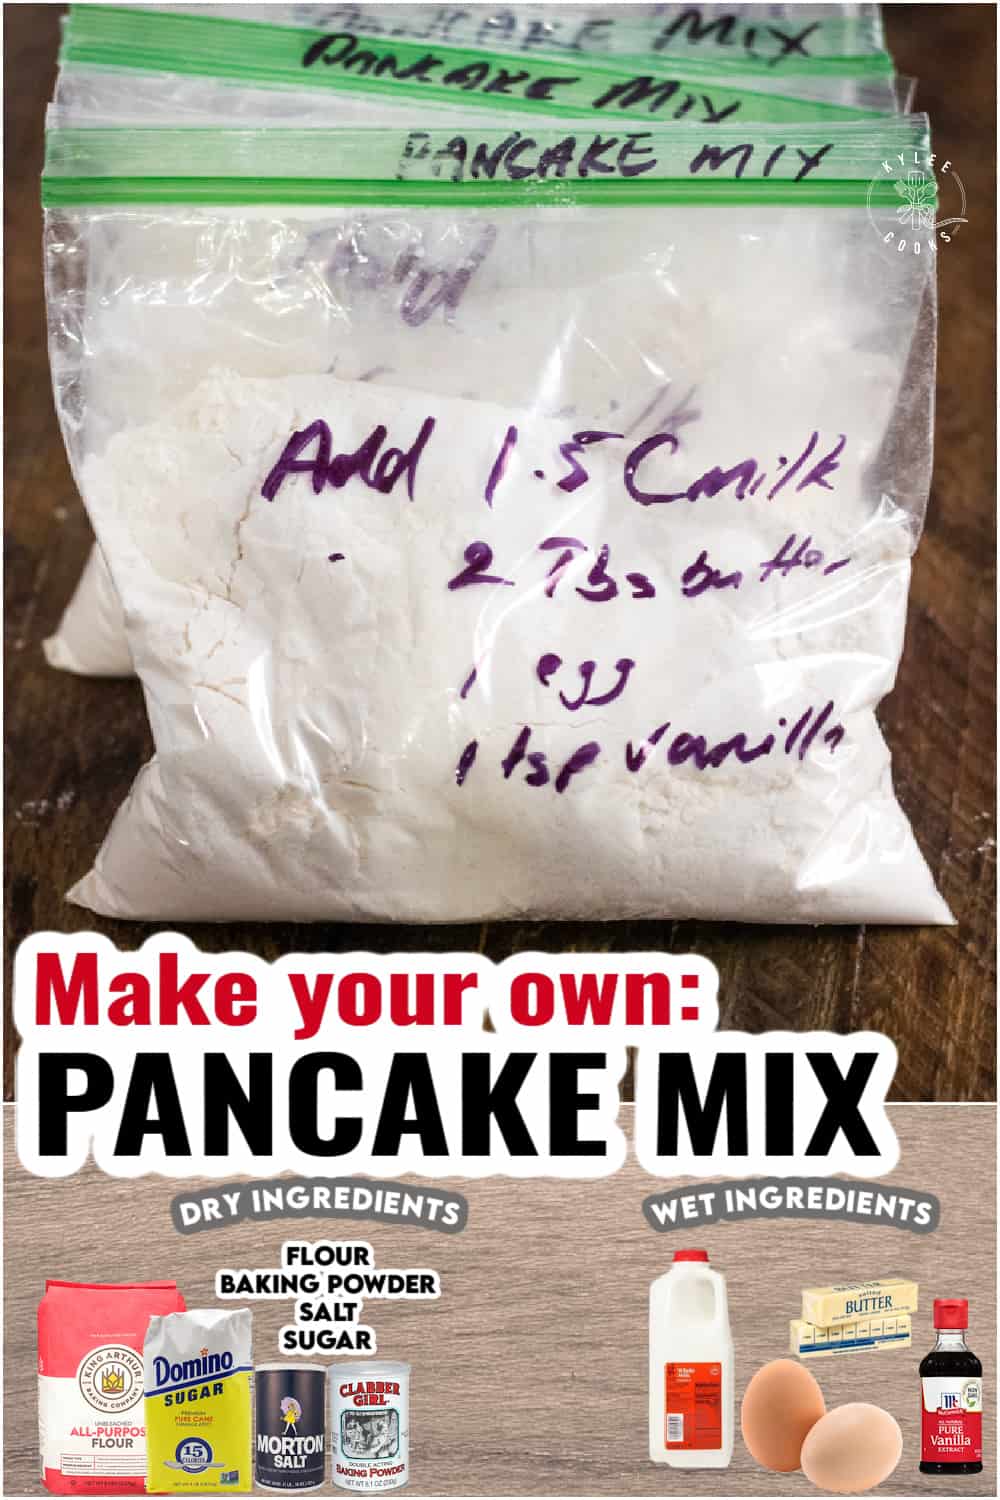 pancake mix ingredients and recipe name with ingredients overlaid in text.